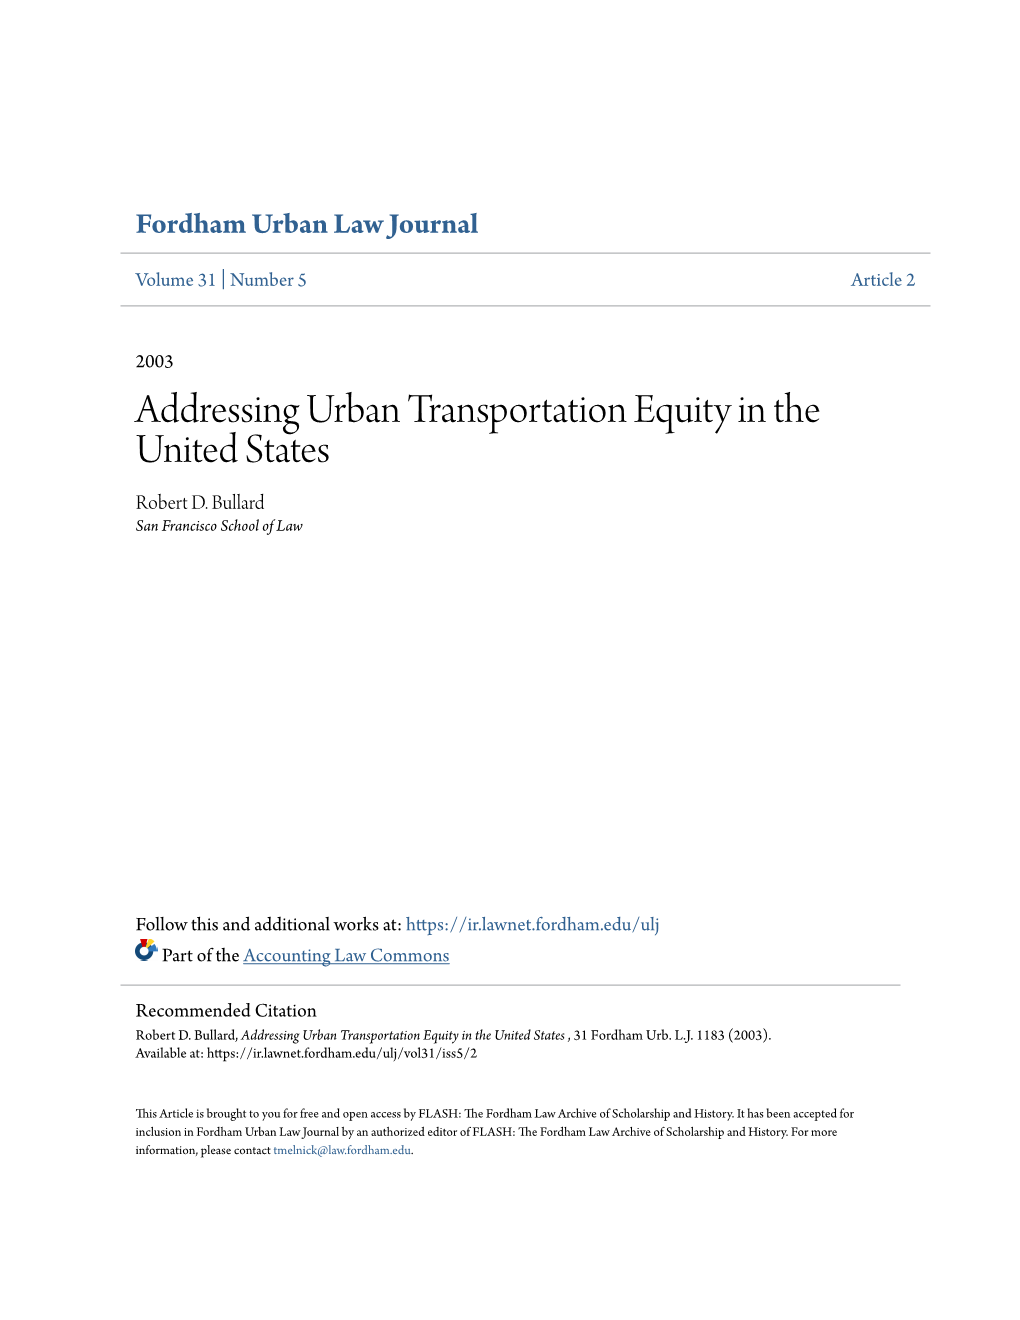 Addressing Urban Transportation Equity in the United States Robert D